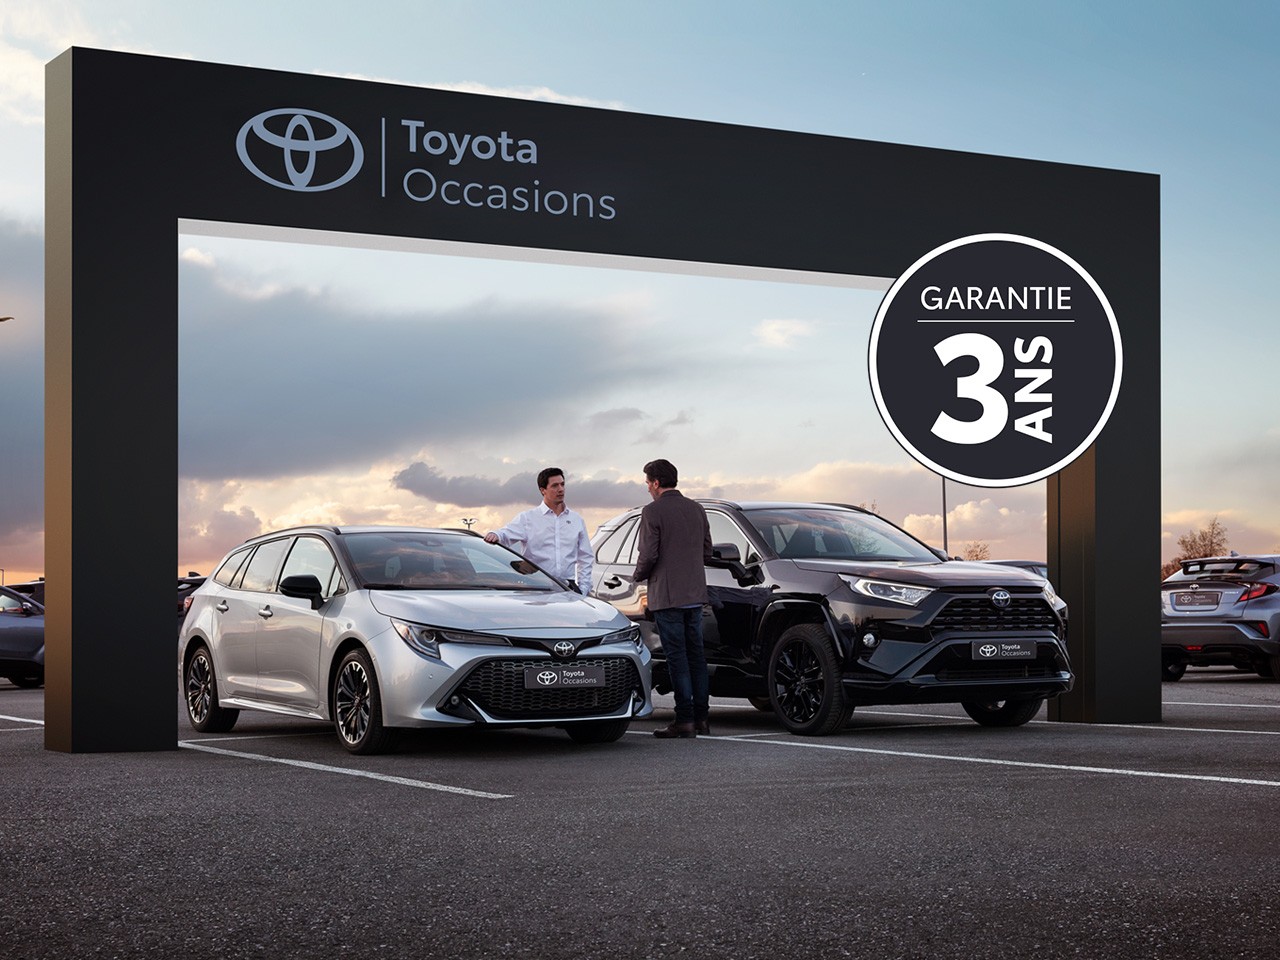 Toyota Occasions avantages